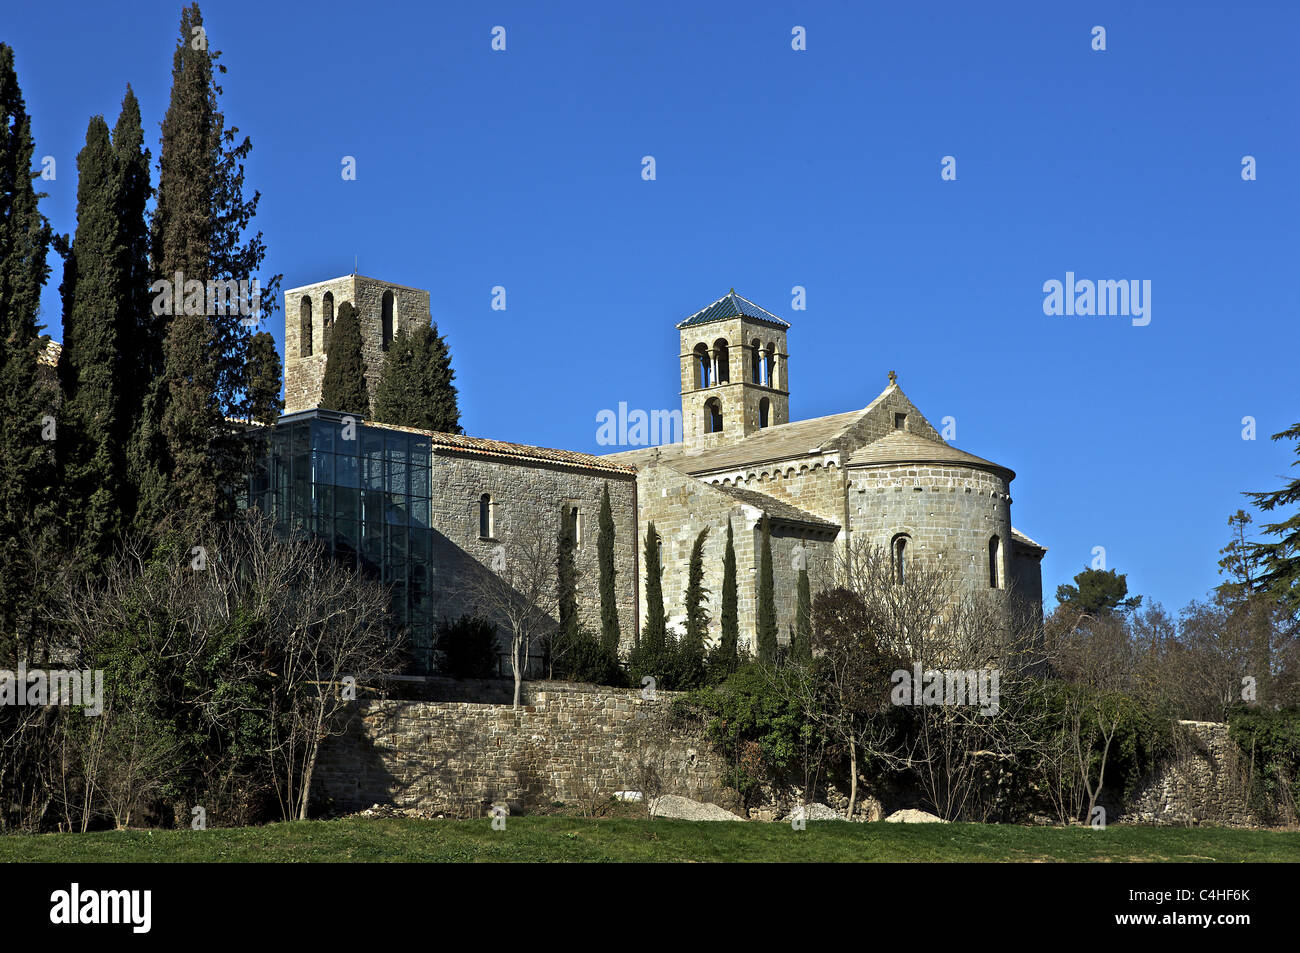 Sant Benet de Bages Monastery (10th century). Restored by Josep Puig Cadafalch. Exterior. Sant Fructuos de Bages. Catalonia. Stock Photo